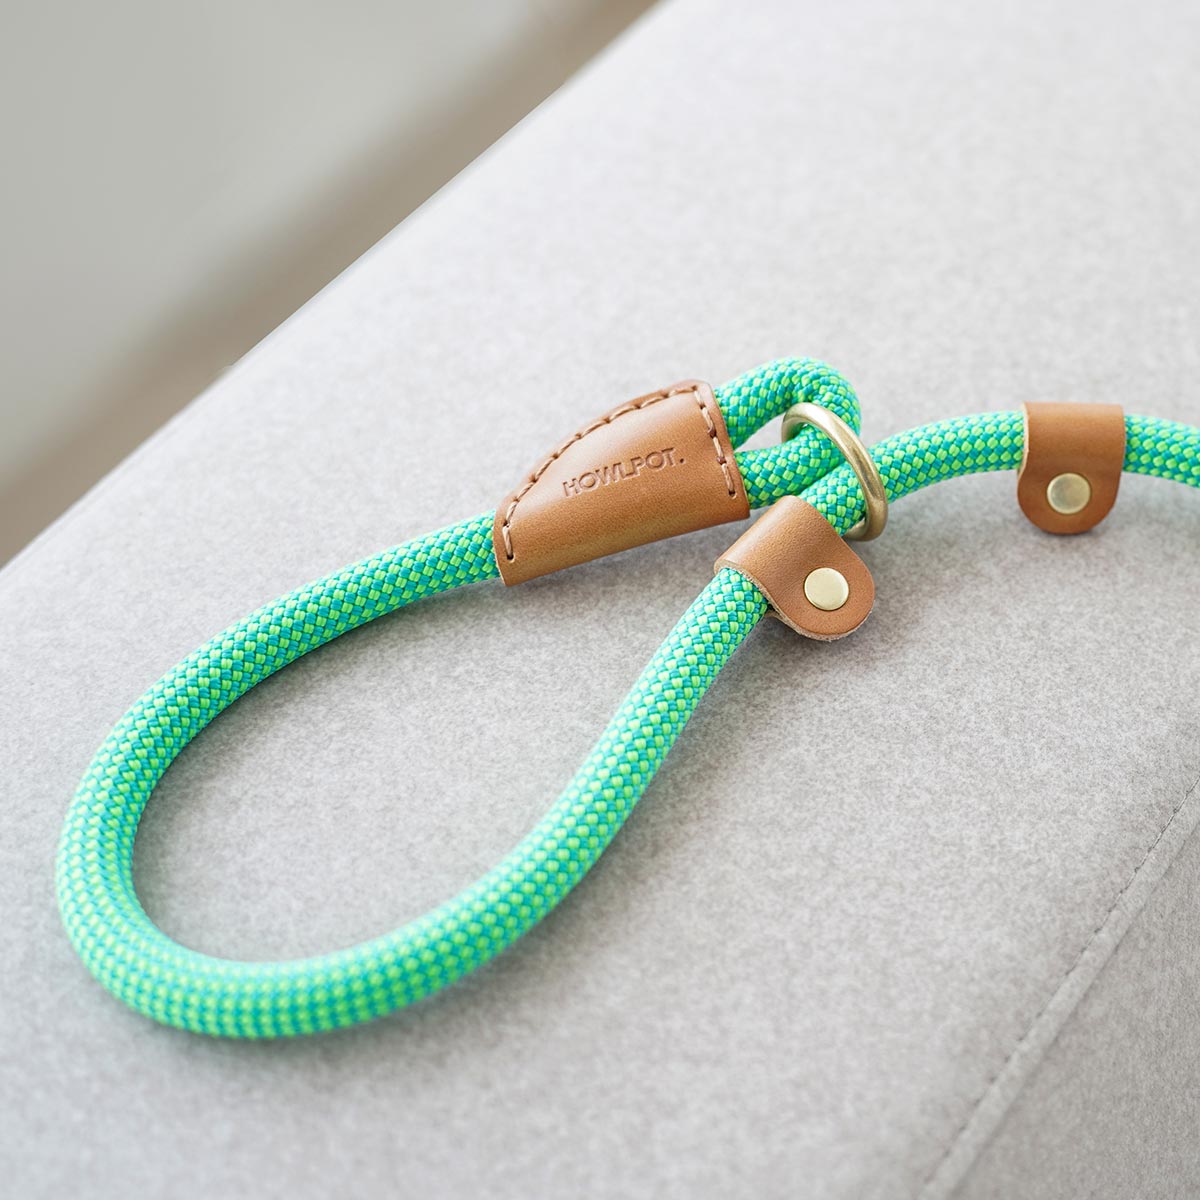 We are Tight All-in-One Leash (Aqua Blue) - Howlpot USA